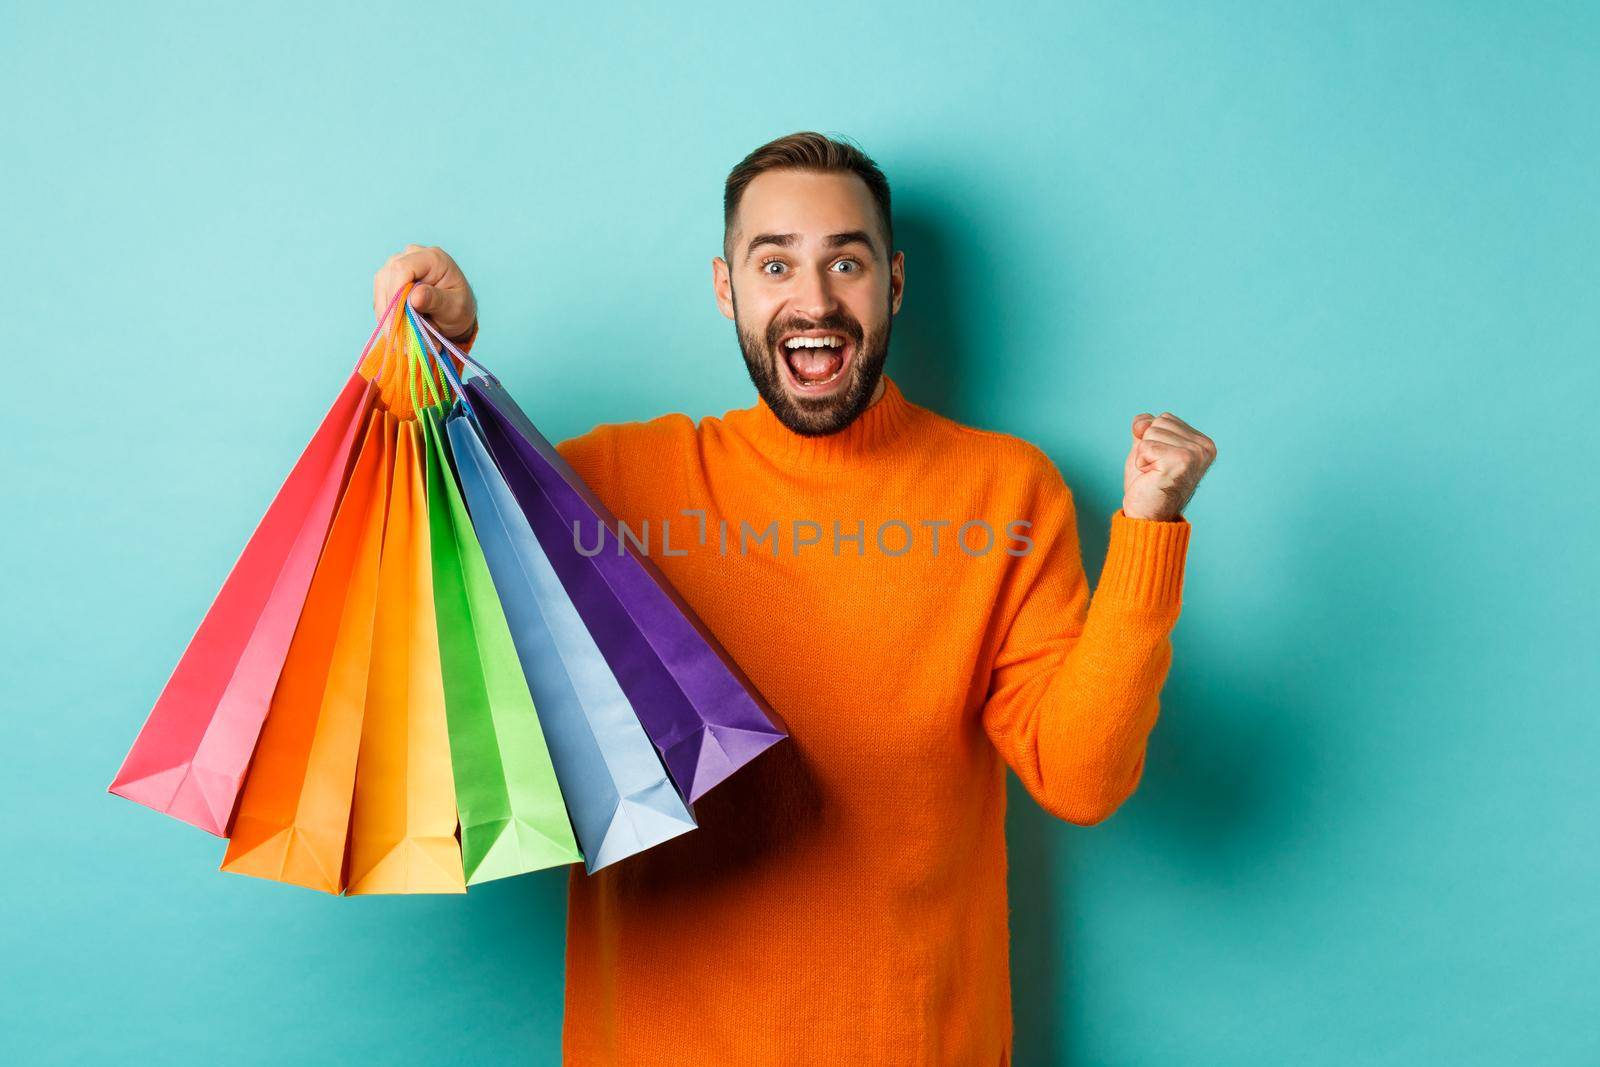 Happy handsome man holding shopping bags and smiling, feeling excitement from discounts, making fist pump, standing over turquoise background.